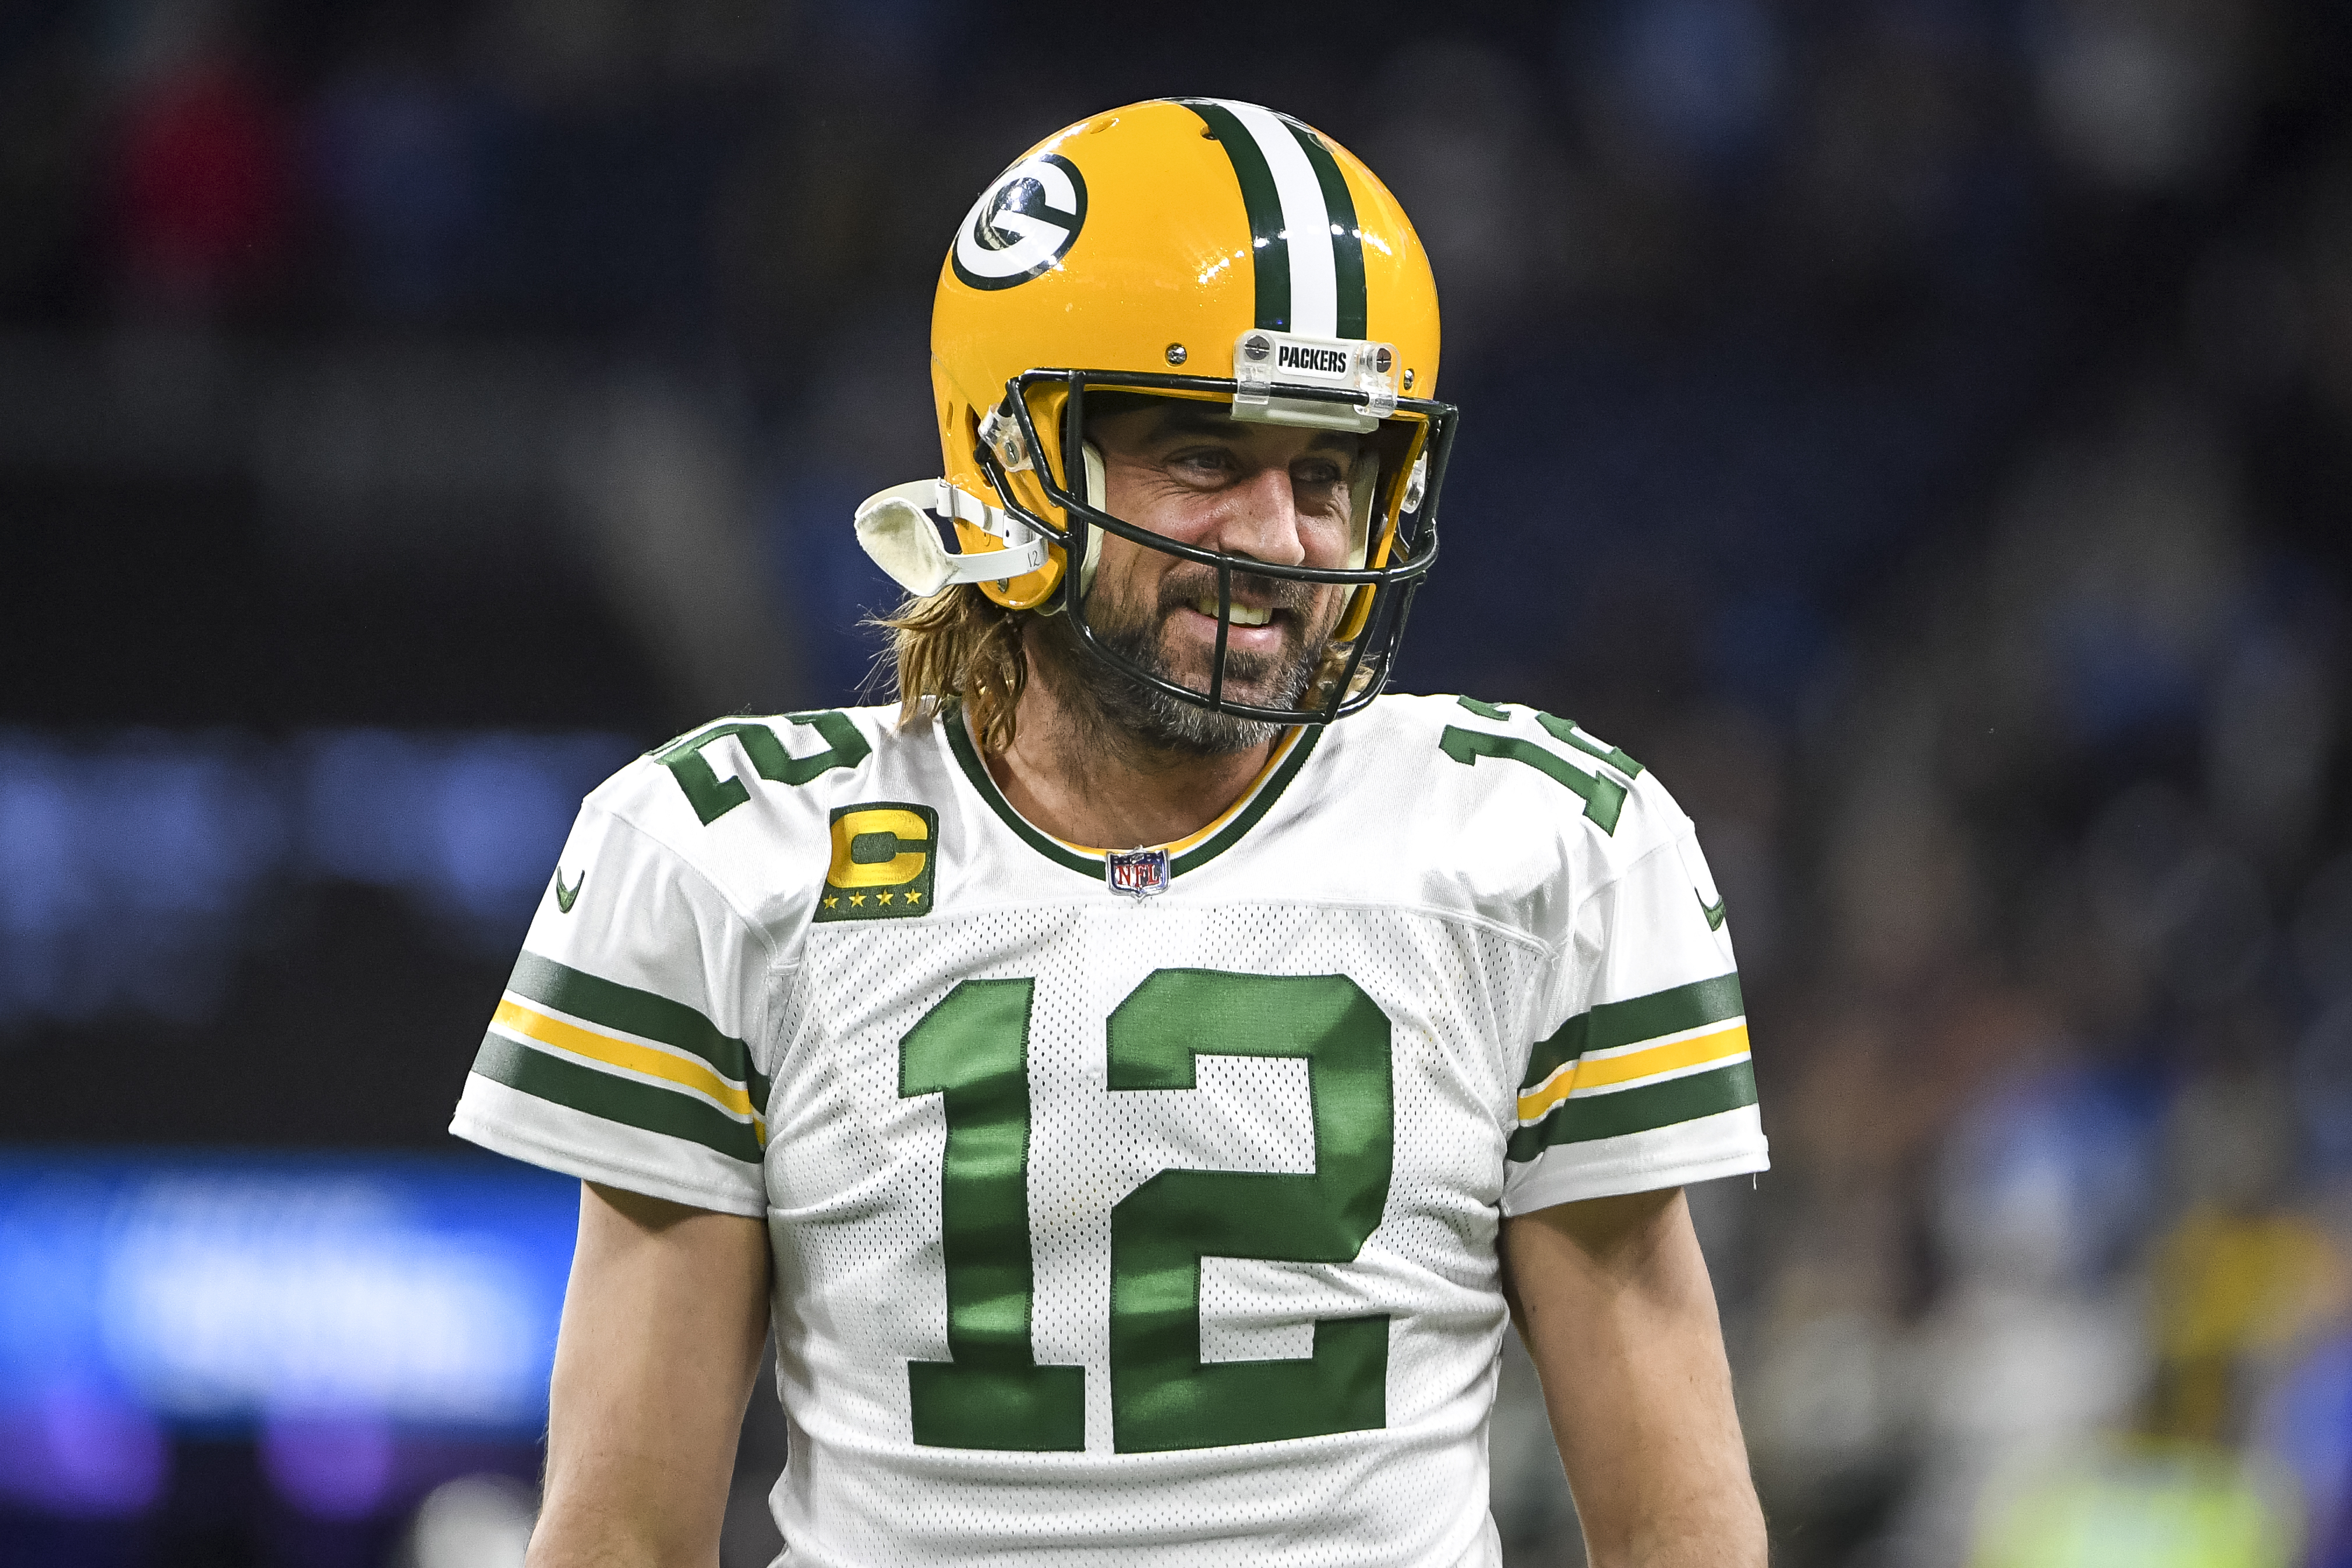 Packers Divisional Round Schedule: Green Bay Next Game Time, Date